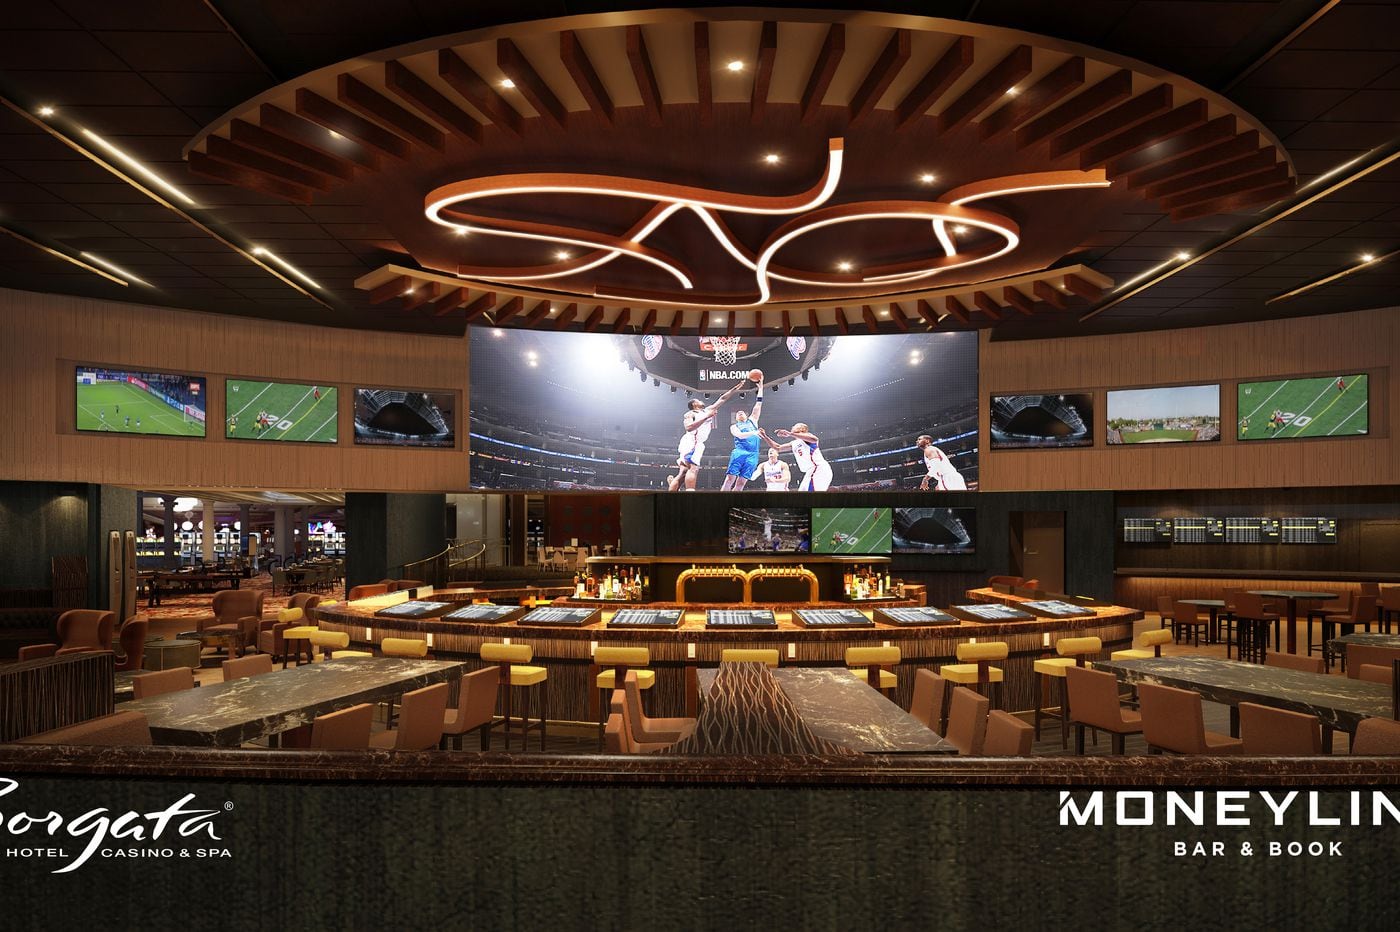 announces date for opening of renovated sportsbook